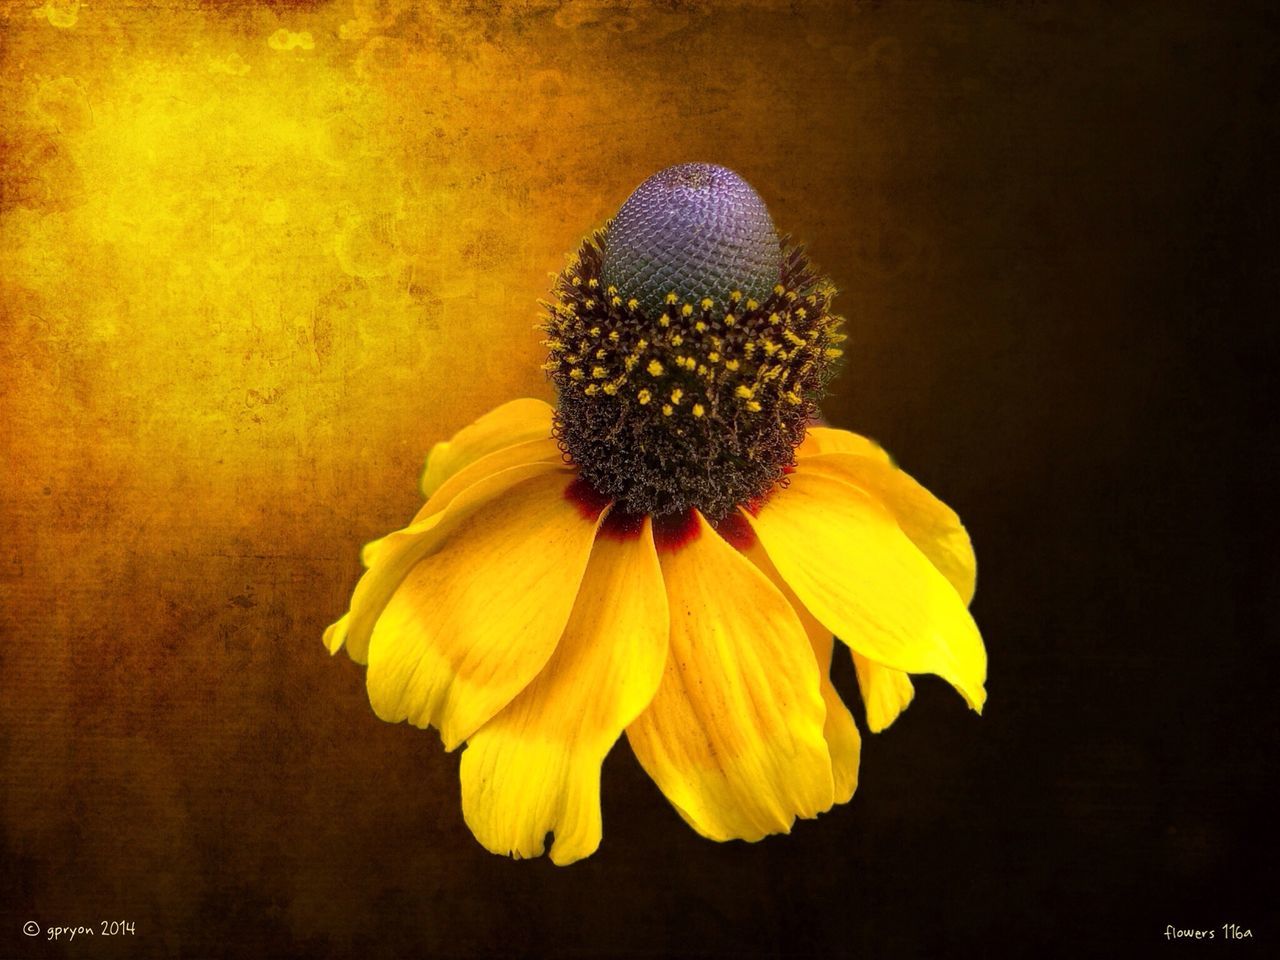 flower, yellow, petal, freshness, flower head, fragility, close-up, beauty in nature, studio shot, single flower, black background, growth, nature, pollen, indoors, plant, blooming, no people, high angle view, focus on foreground